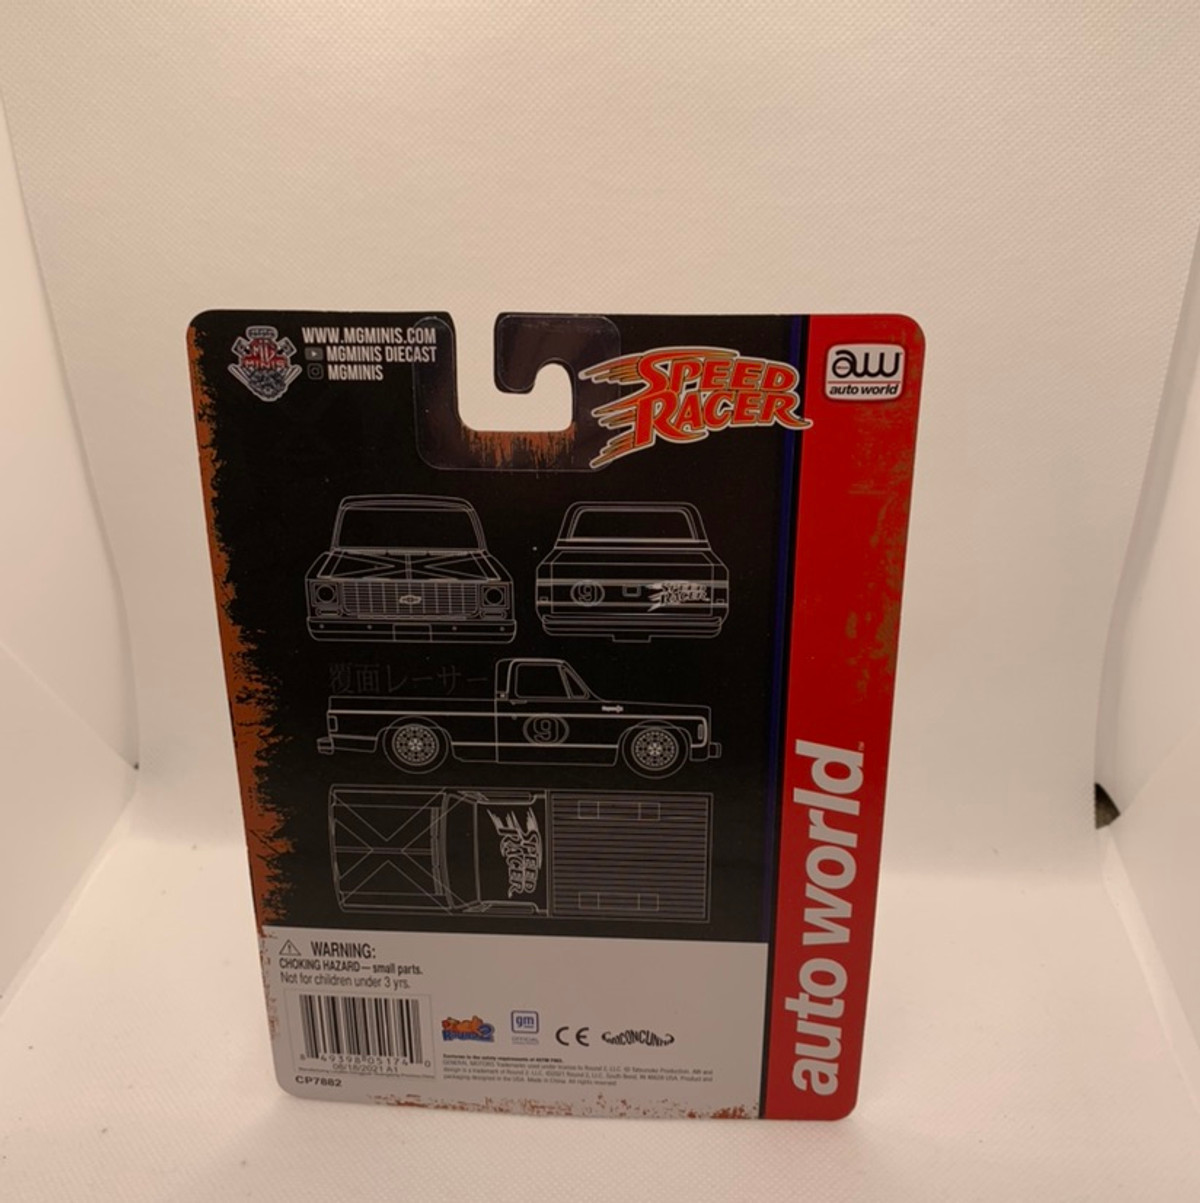 Auto World MGMINIS Exclusive Speed Racer 1973 Chevrolet Cheyenne